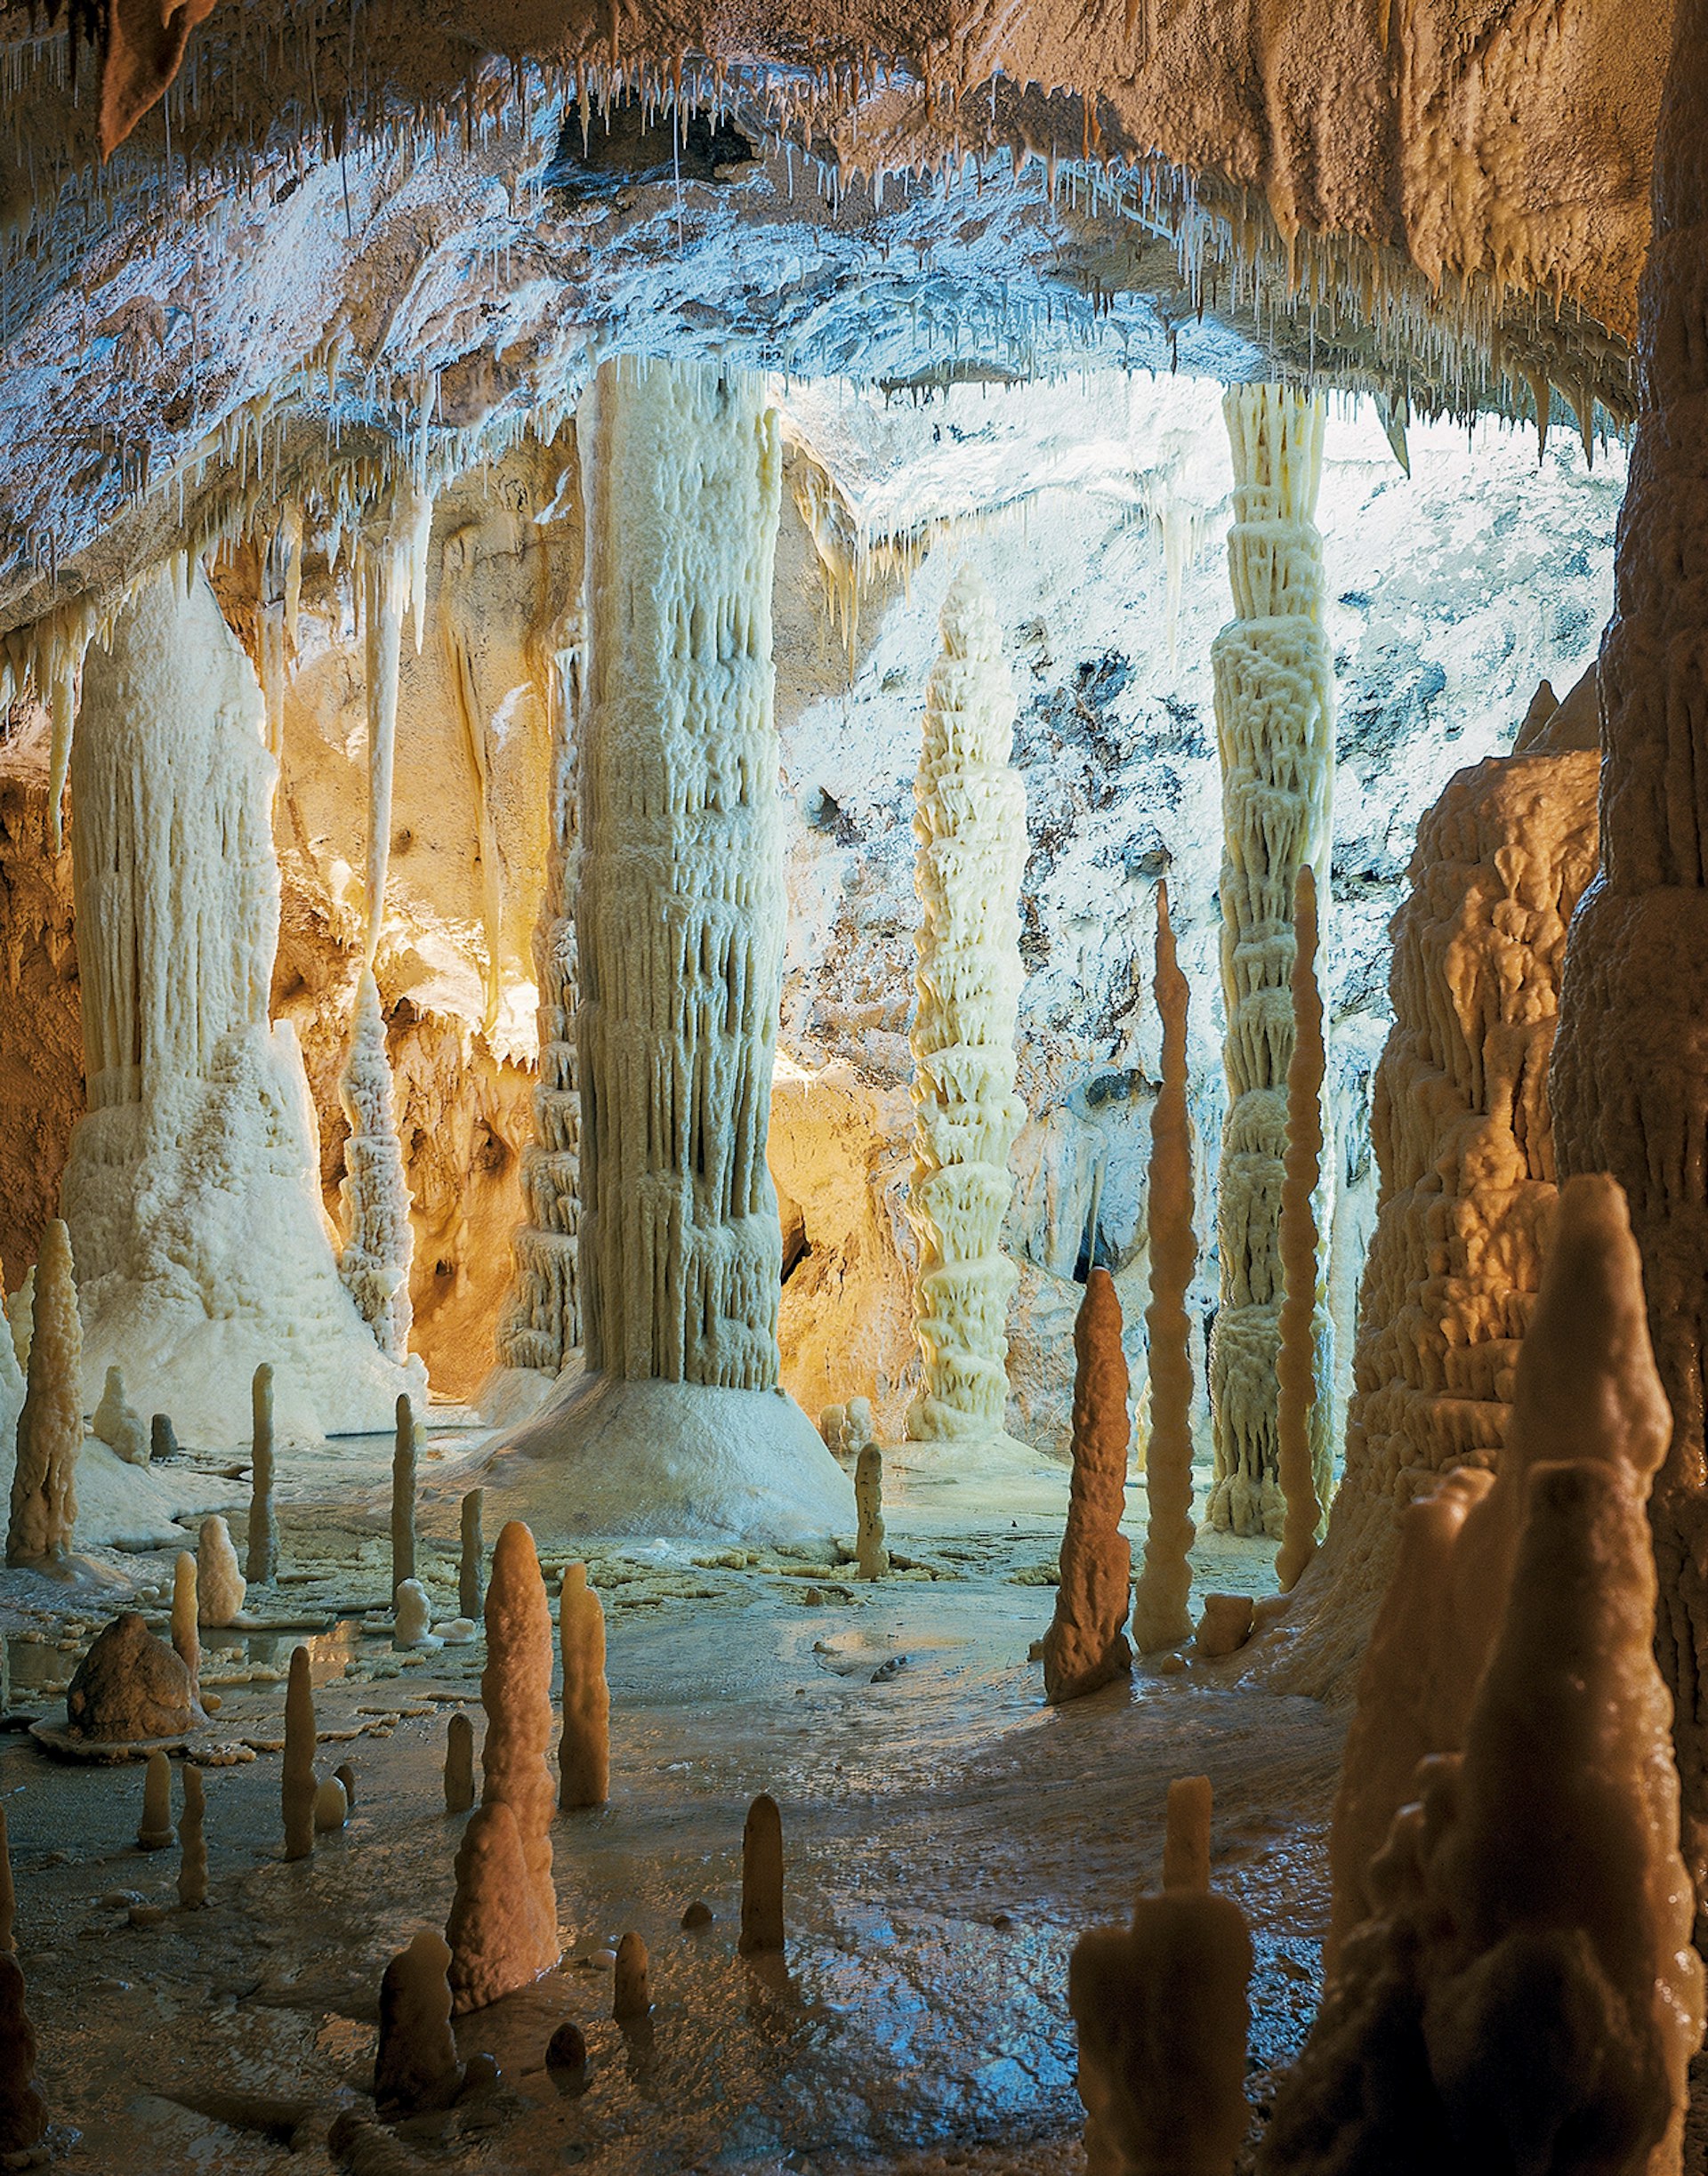 Large stone columns stretch from the floor to the ceiling of a white cavern. Grotte di Frasassi. Le Marche, Italy.